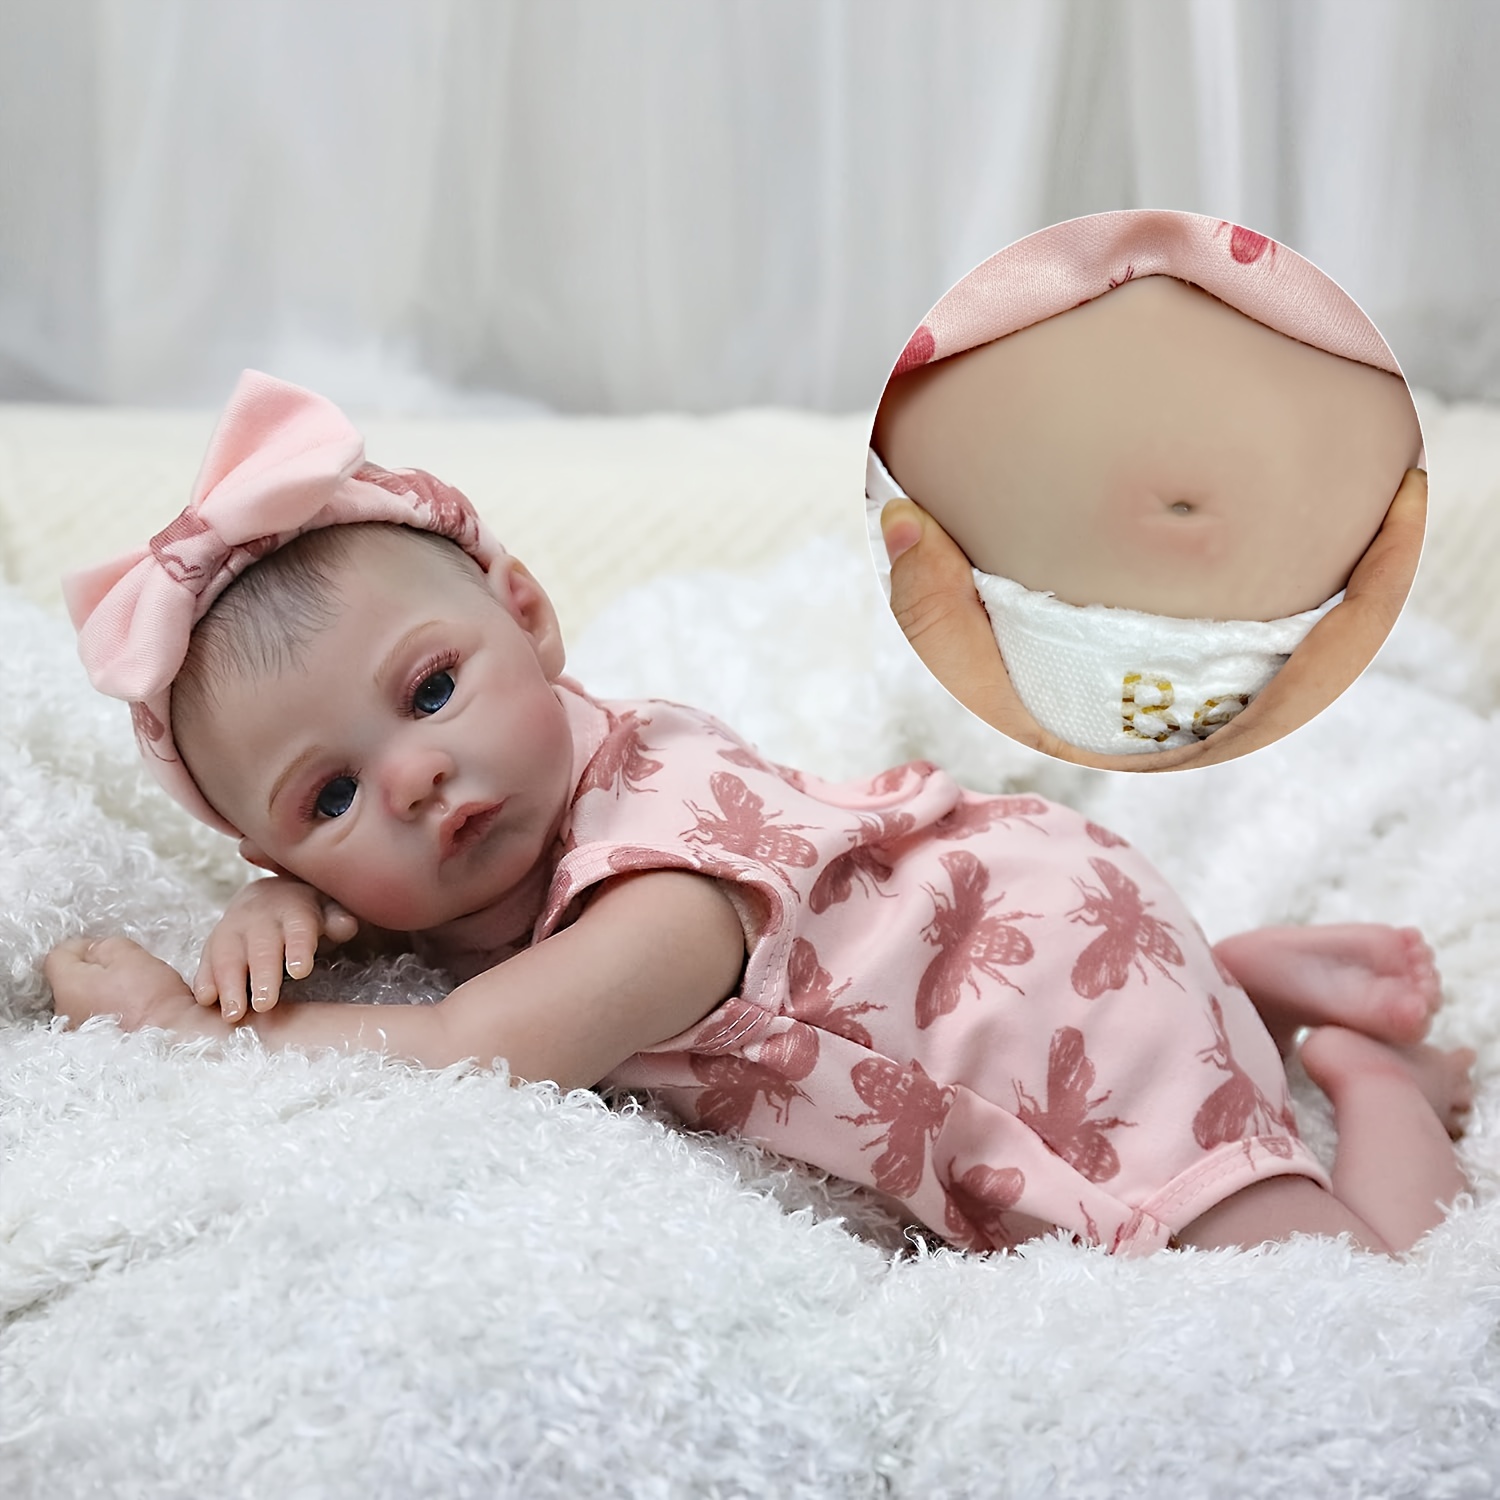 OUTOP 60cm Full Body Silicone Reborn Dolls With Long Hair Toddler Girl  Princess Waterproof Toy For Girls 